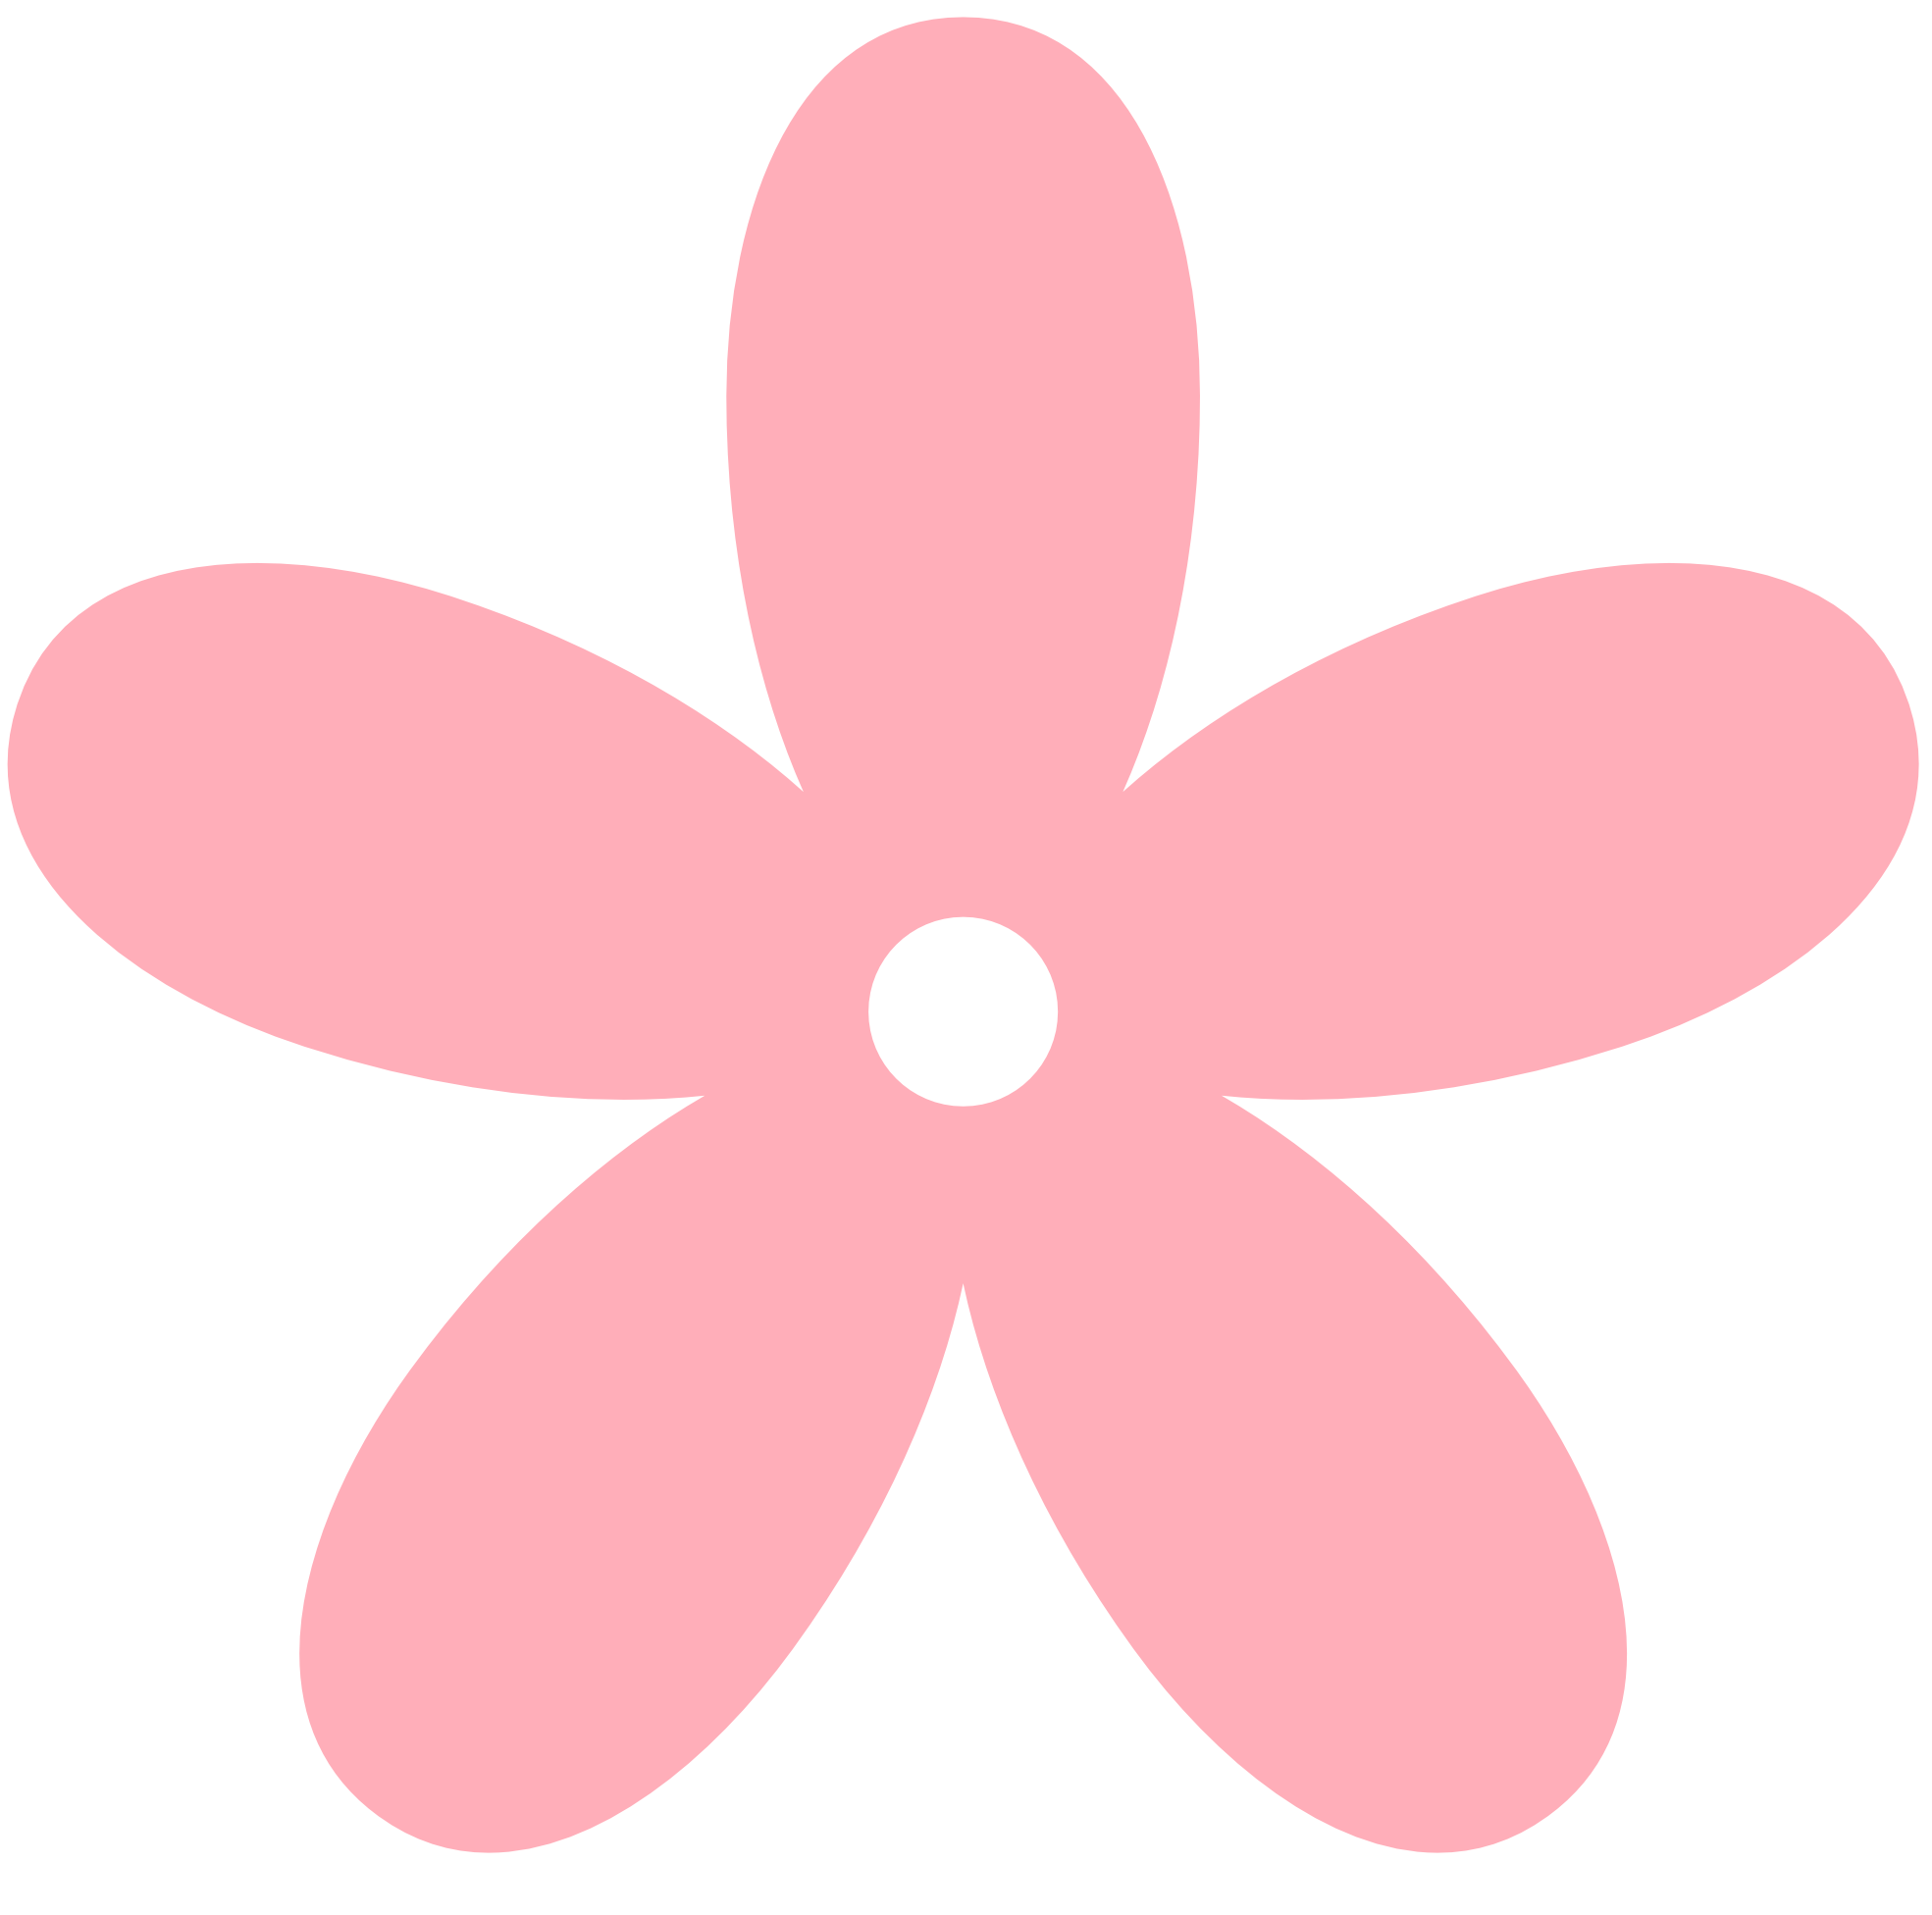 Pink Flowers Cartoon - Cliparts.co